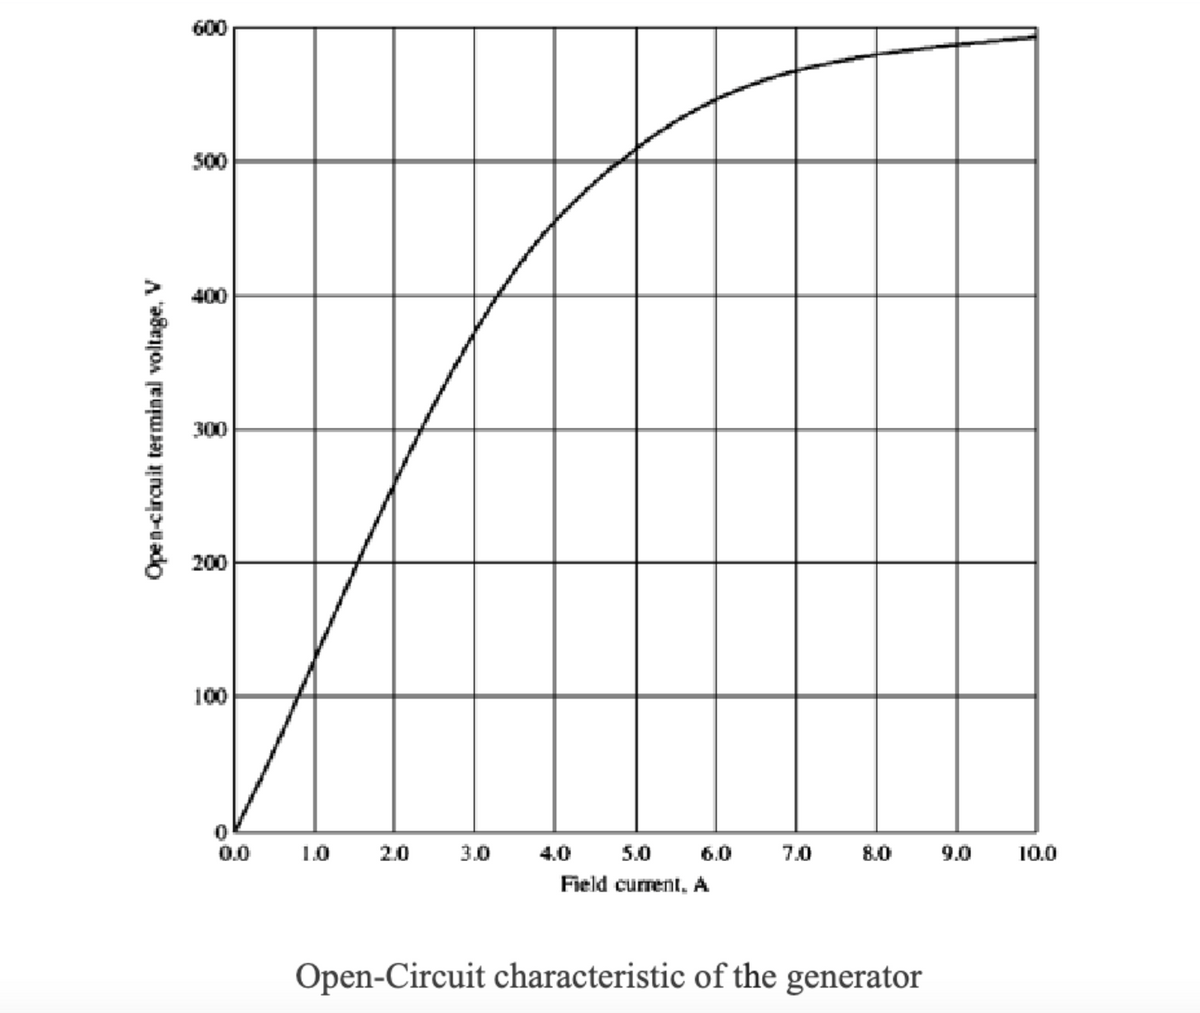 Open-circuit terminal voltage, V
600
500
400
300
200
100
0
0.0
1.0
2.0
3.0
4.0
5.0
Field current, A
6.0
7.0
8.0
Open-Circuit characteristic of the generator
9.0
10.0